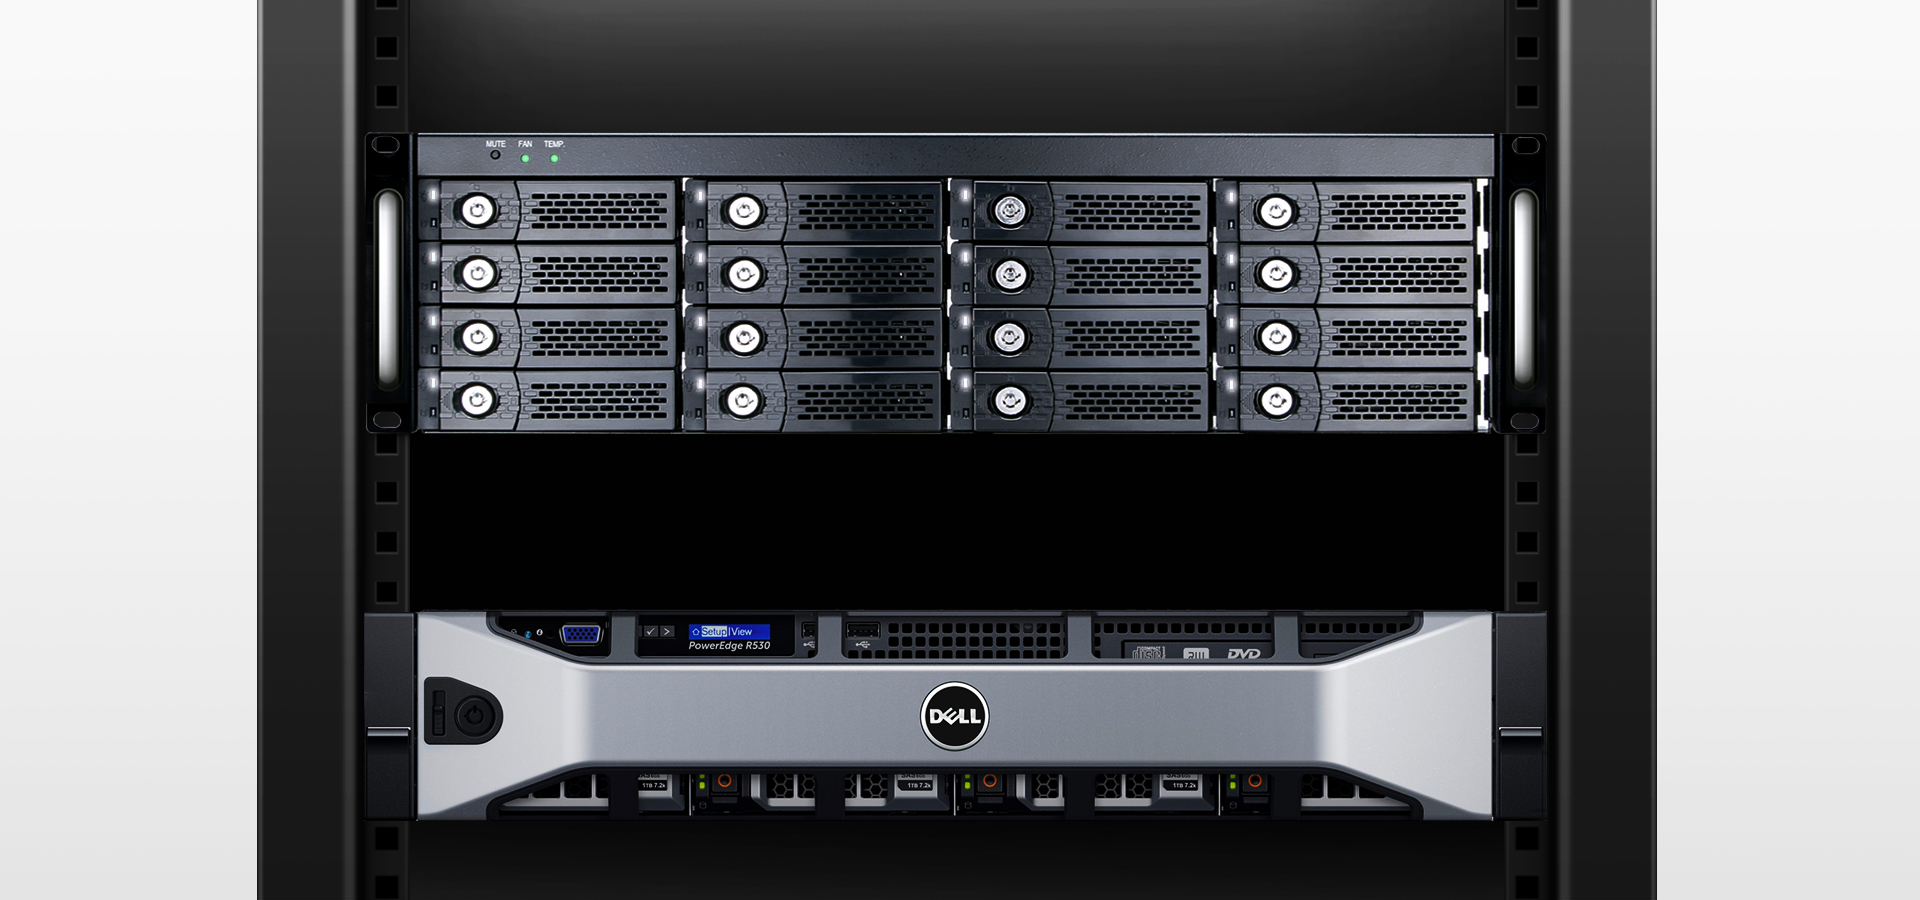 netstor na331a is suitable for the rackmount